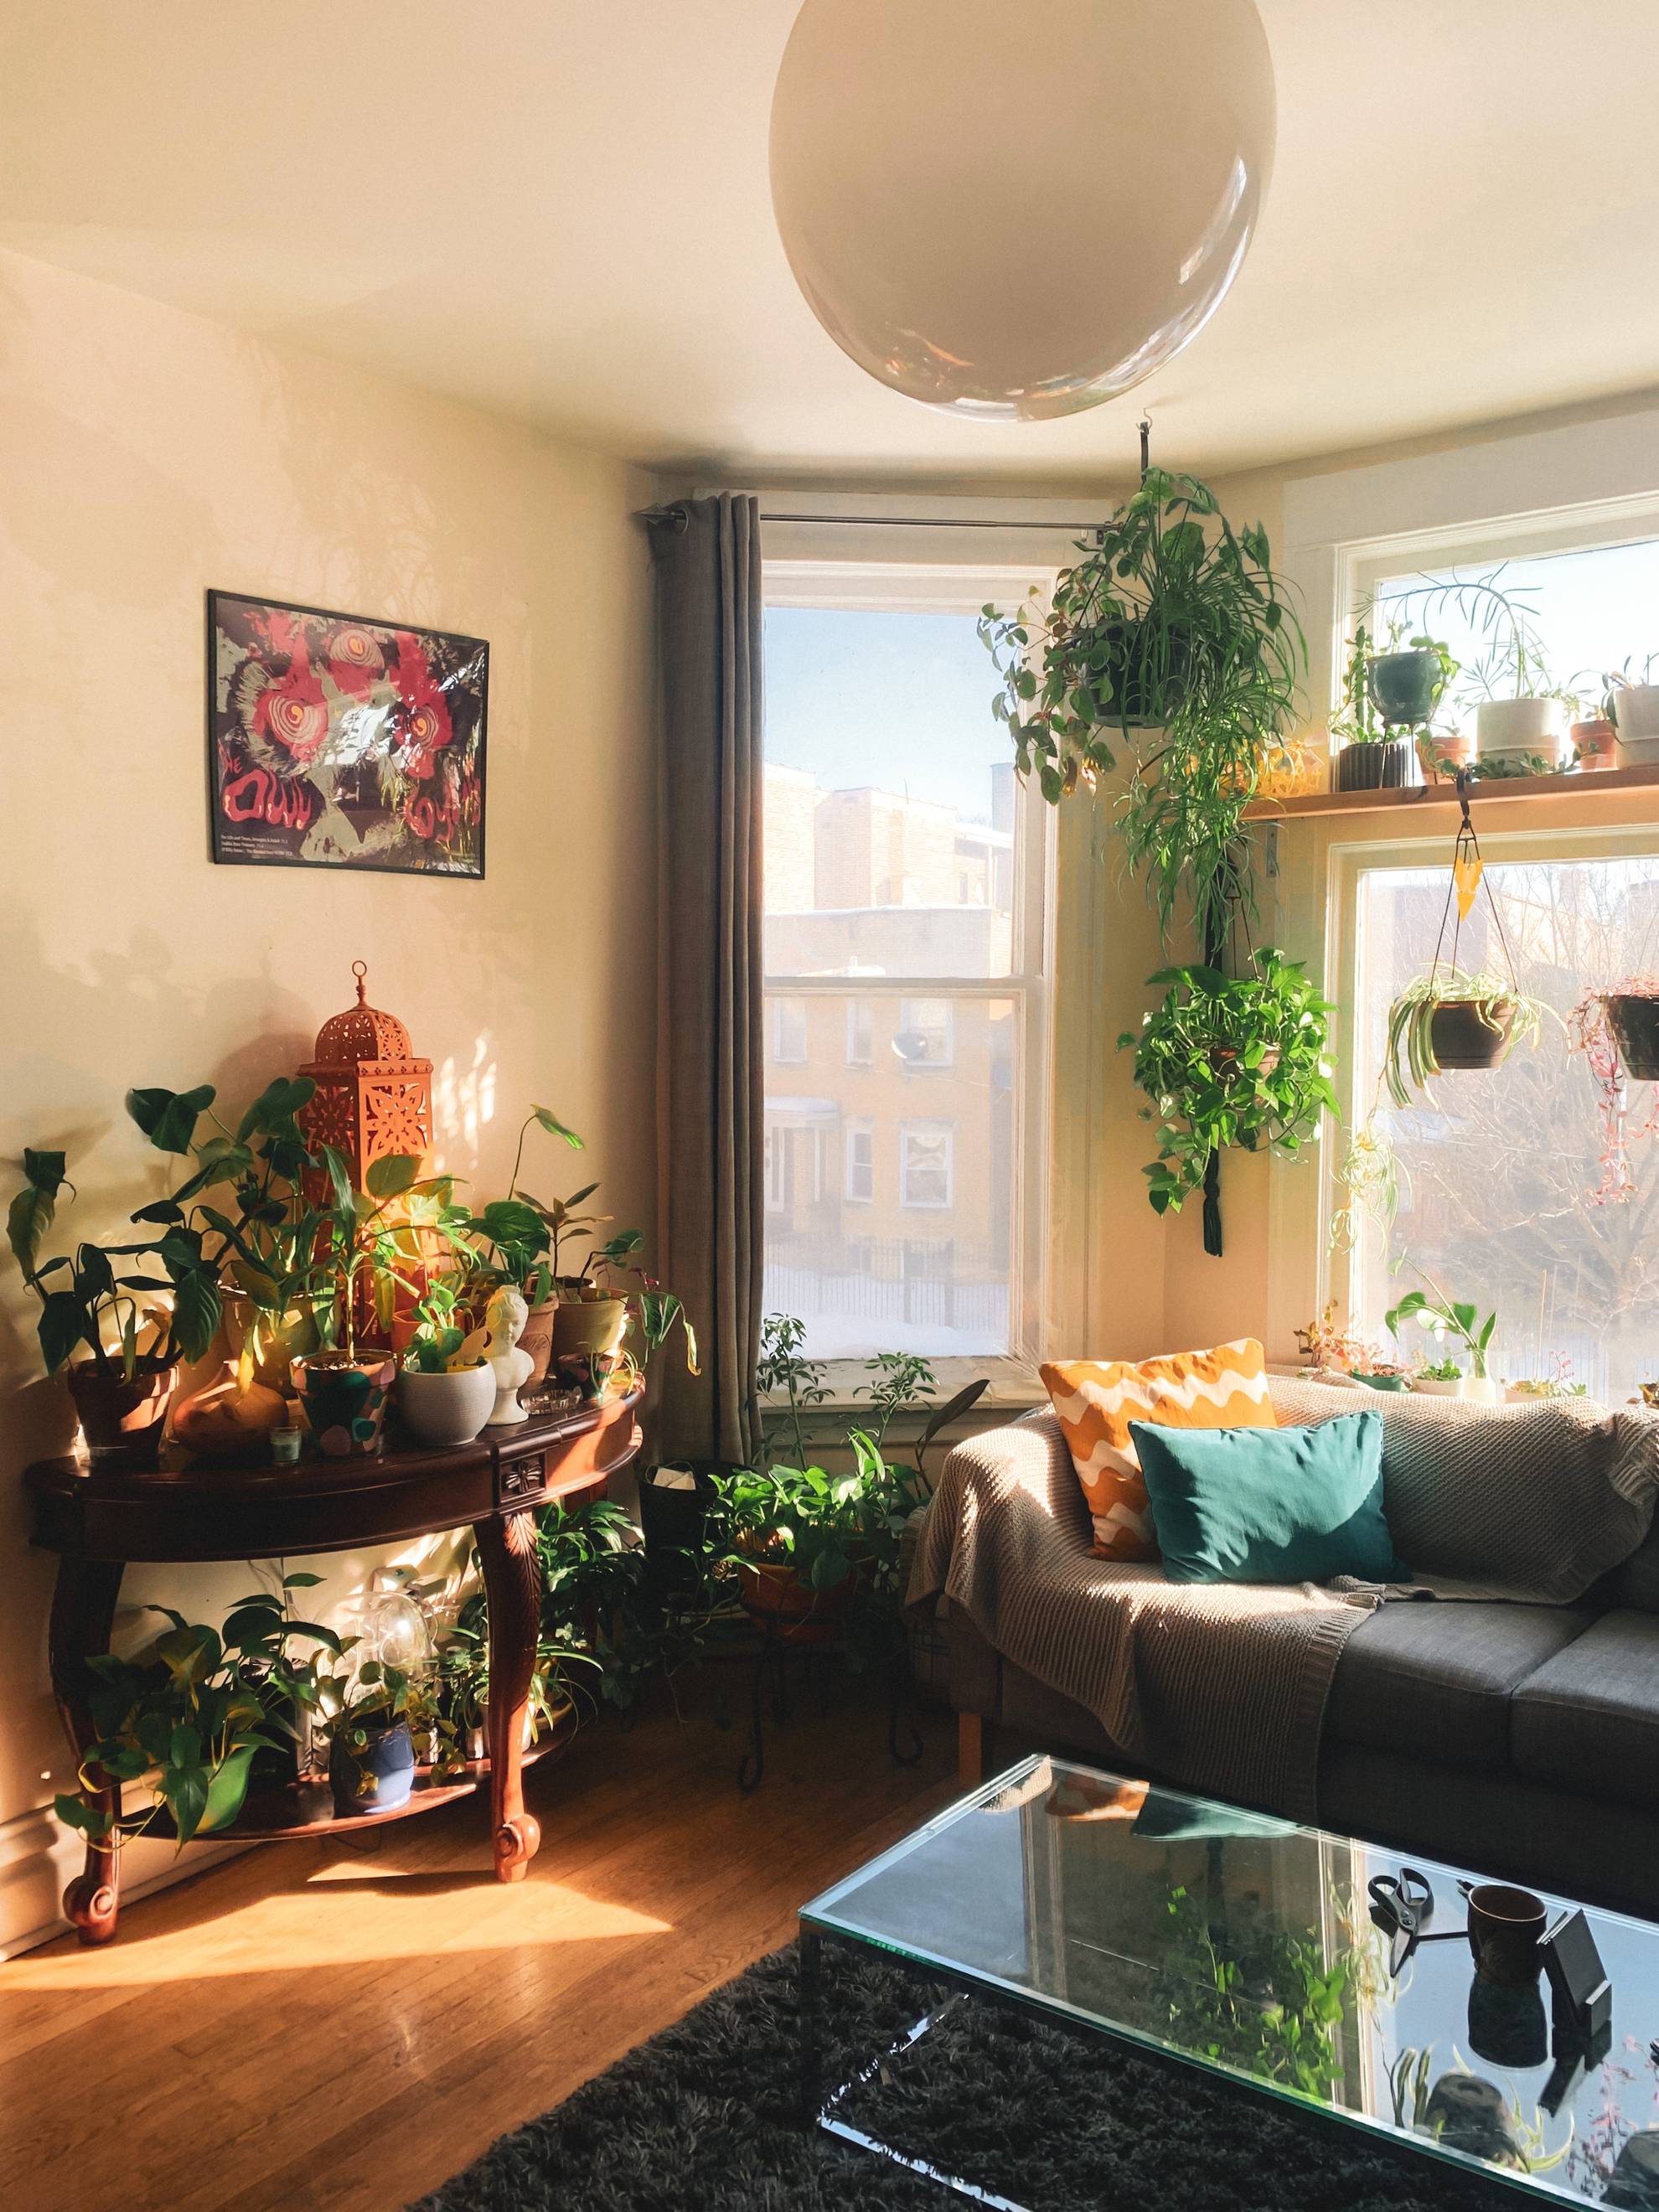 house plants in a sunny lounge with large open window